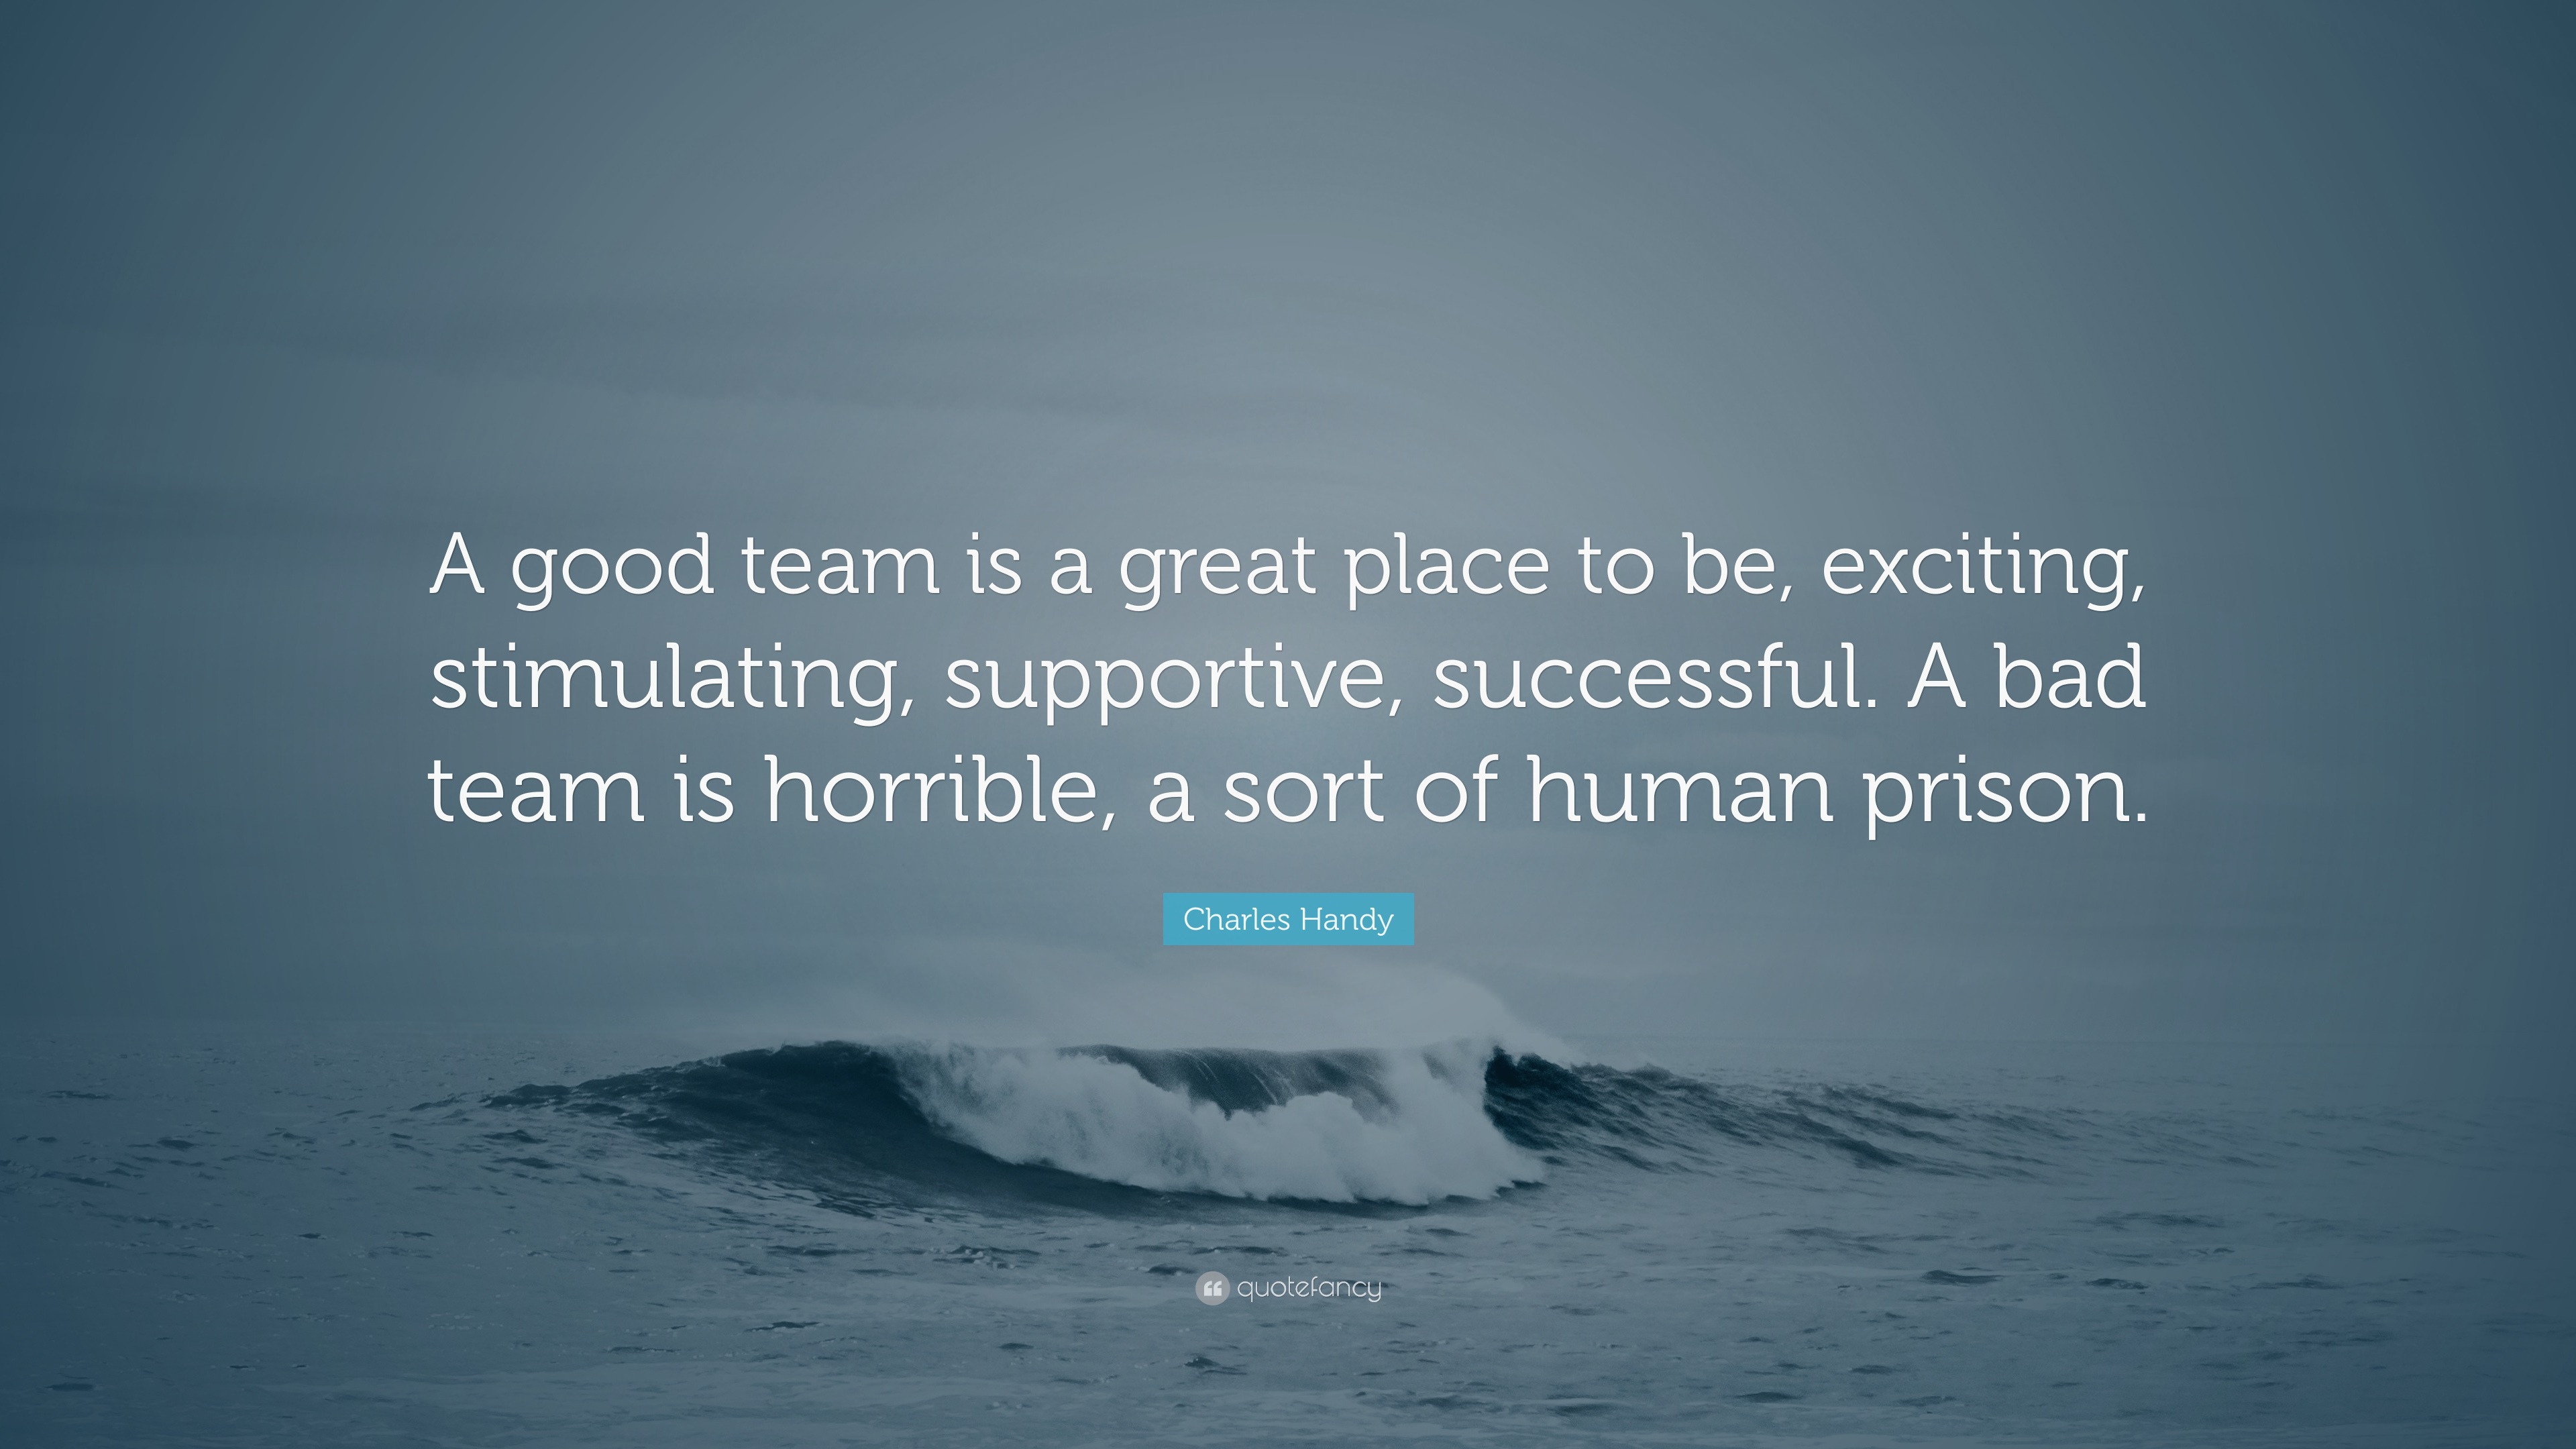 Charles Handy Quote A Good Team Is A Great Place To Be Exciting Stimulating Supportive Successful A Bad Team Is Horrible A Sort Of Hum 10 Wallpapers Quotefancy